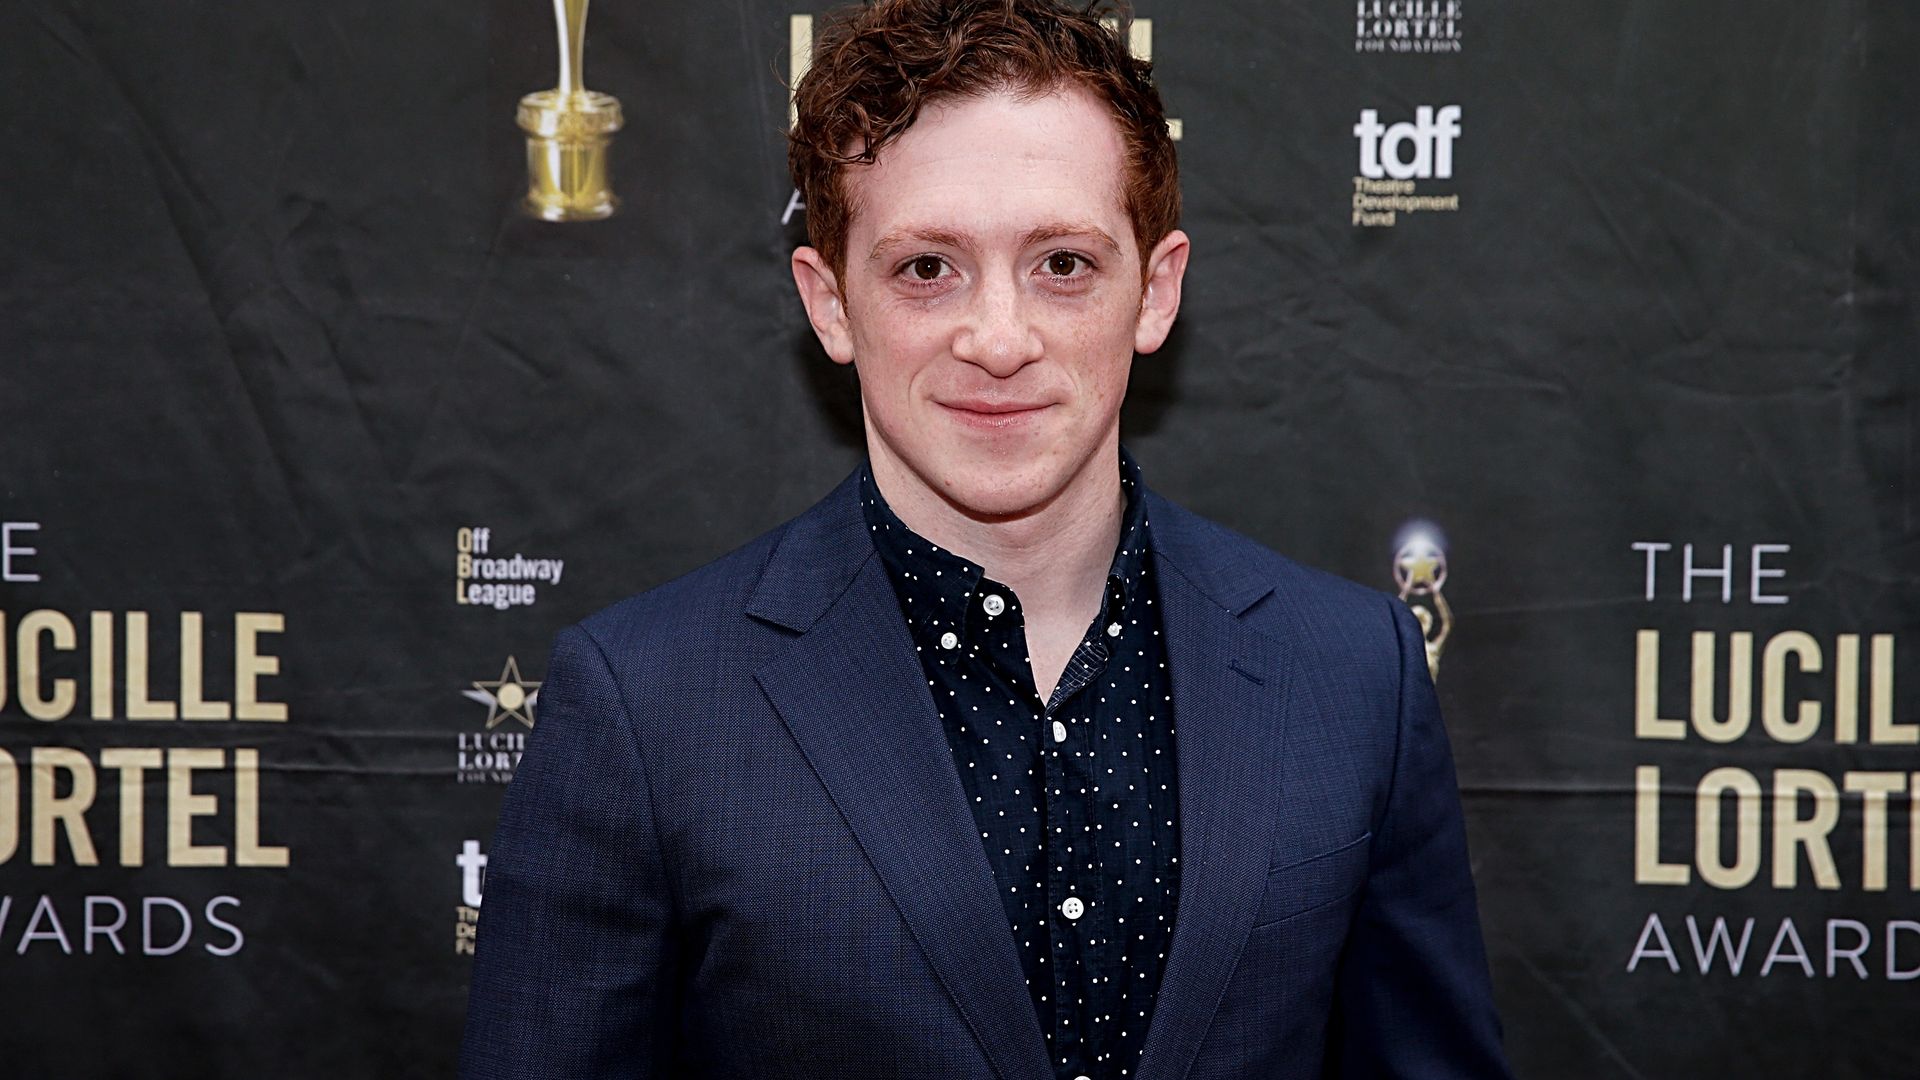 Ethan Slater attends the 37th Annual Lucille Lortel Awards at NYU Skirball Center on May 01, 2022 in New York City. (Photo by Dominik Bindl/WireImage)